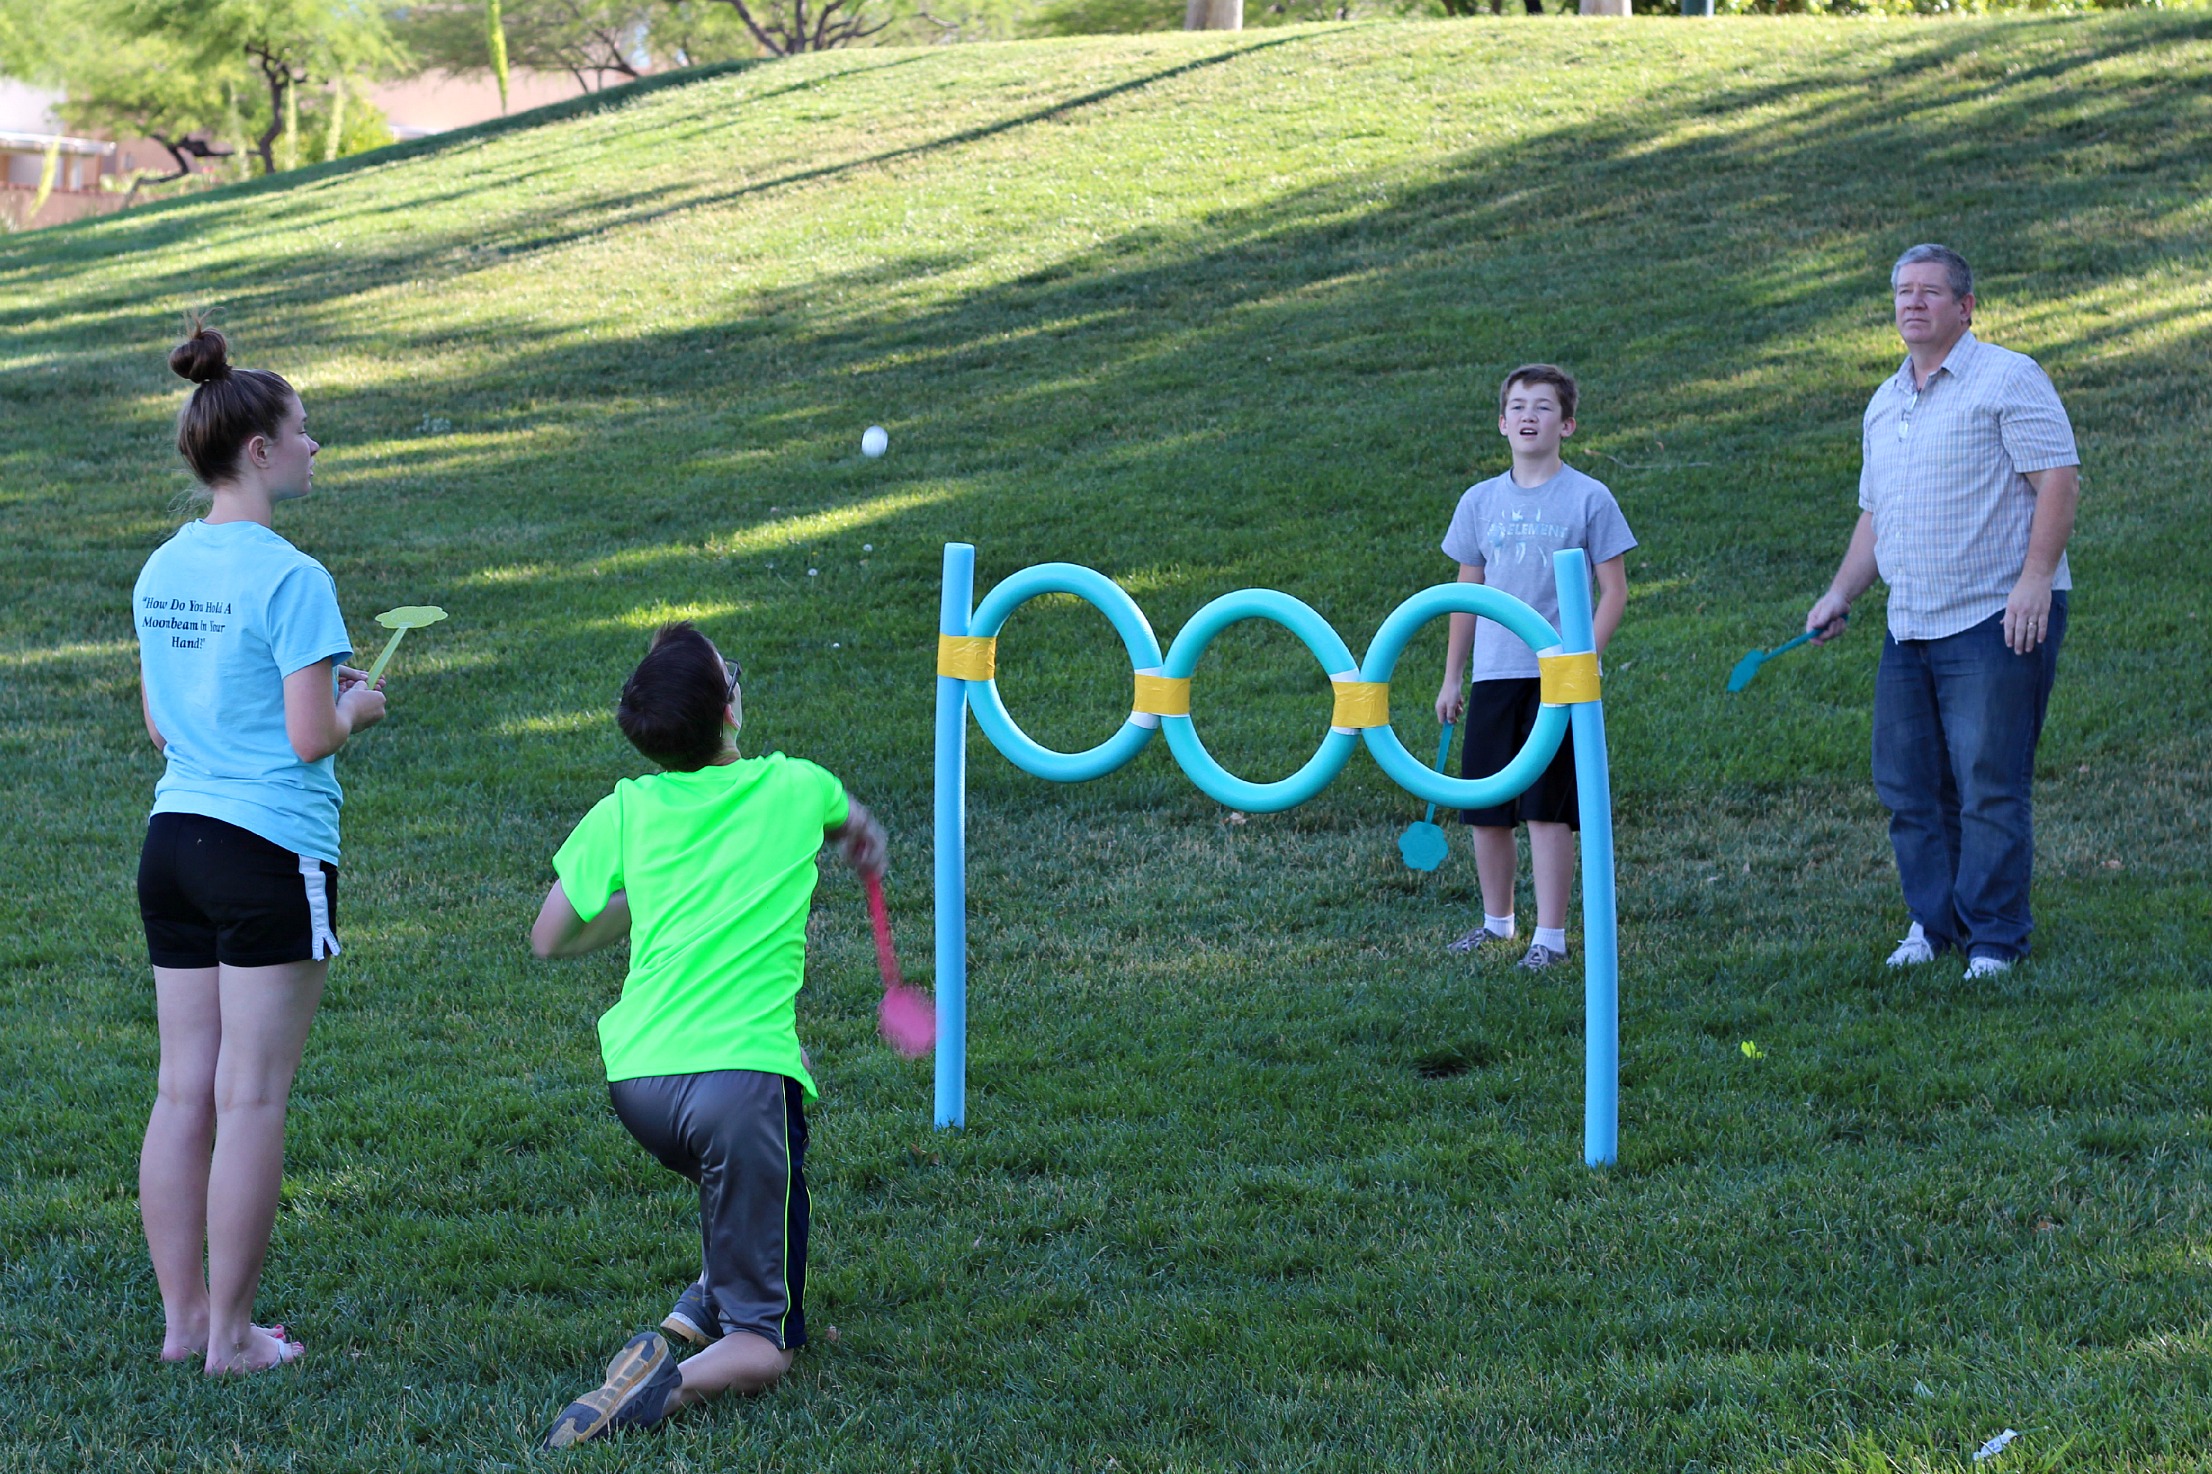 What are some good outdoor games for children?